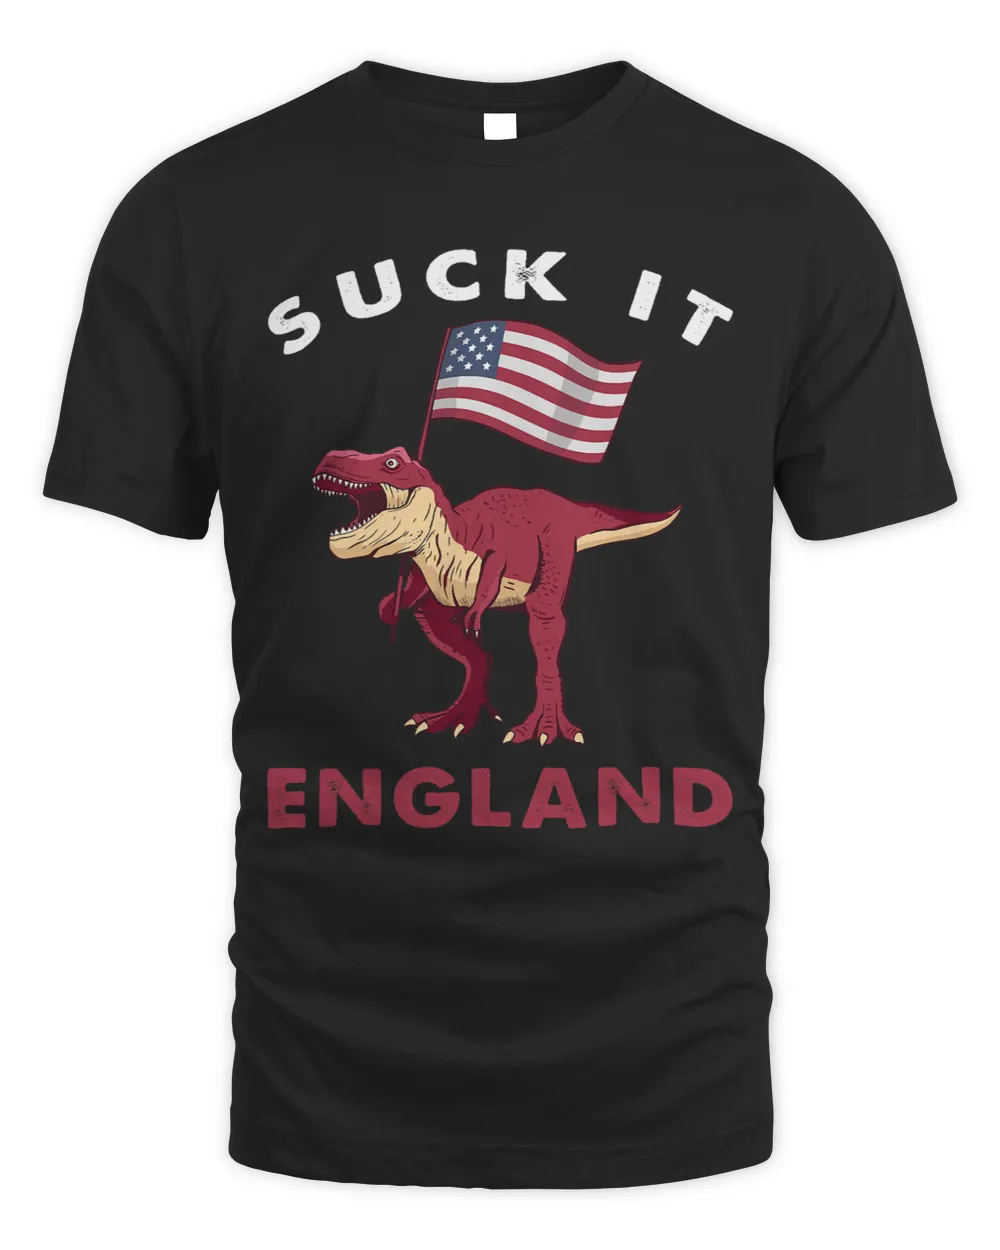 Suck it England Funny 4th of July TRex